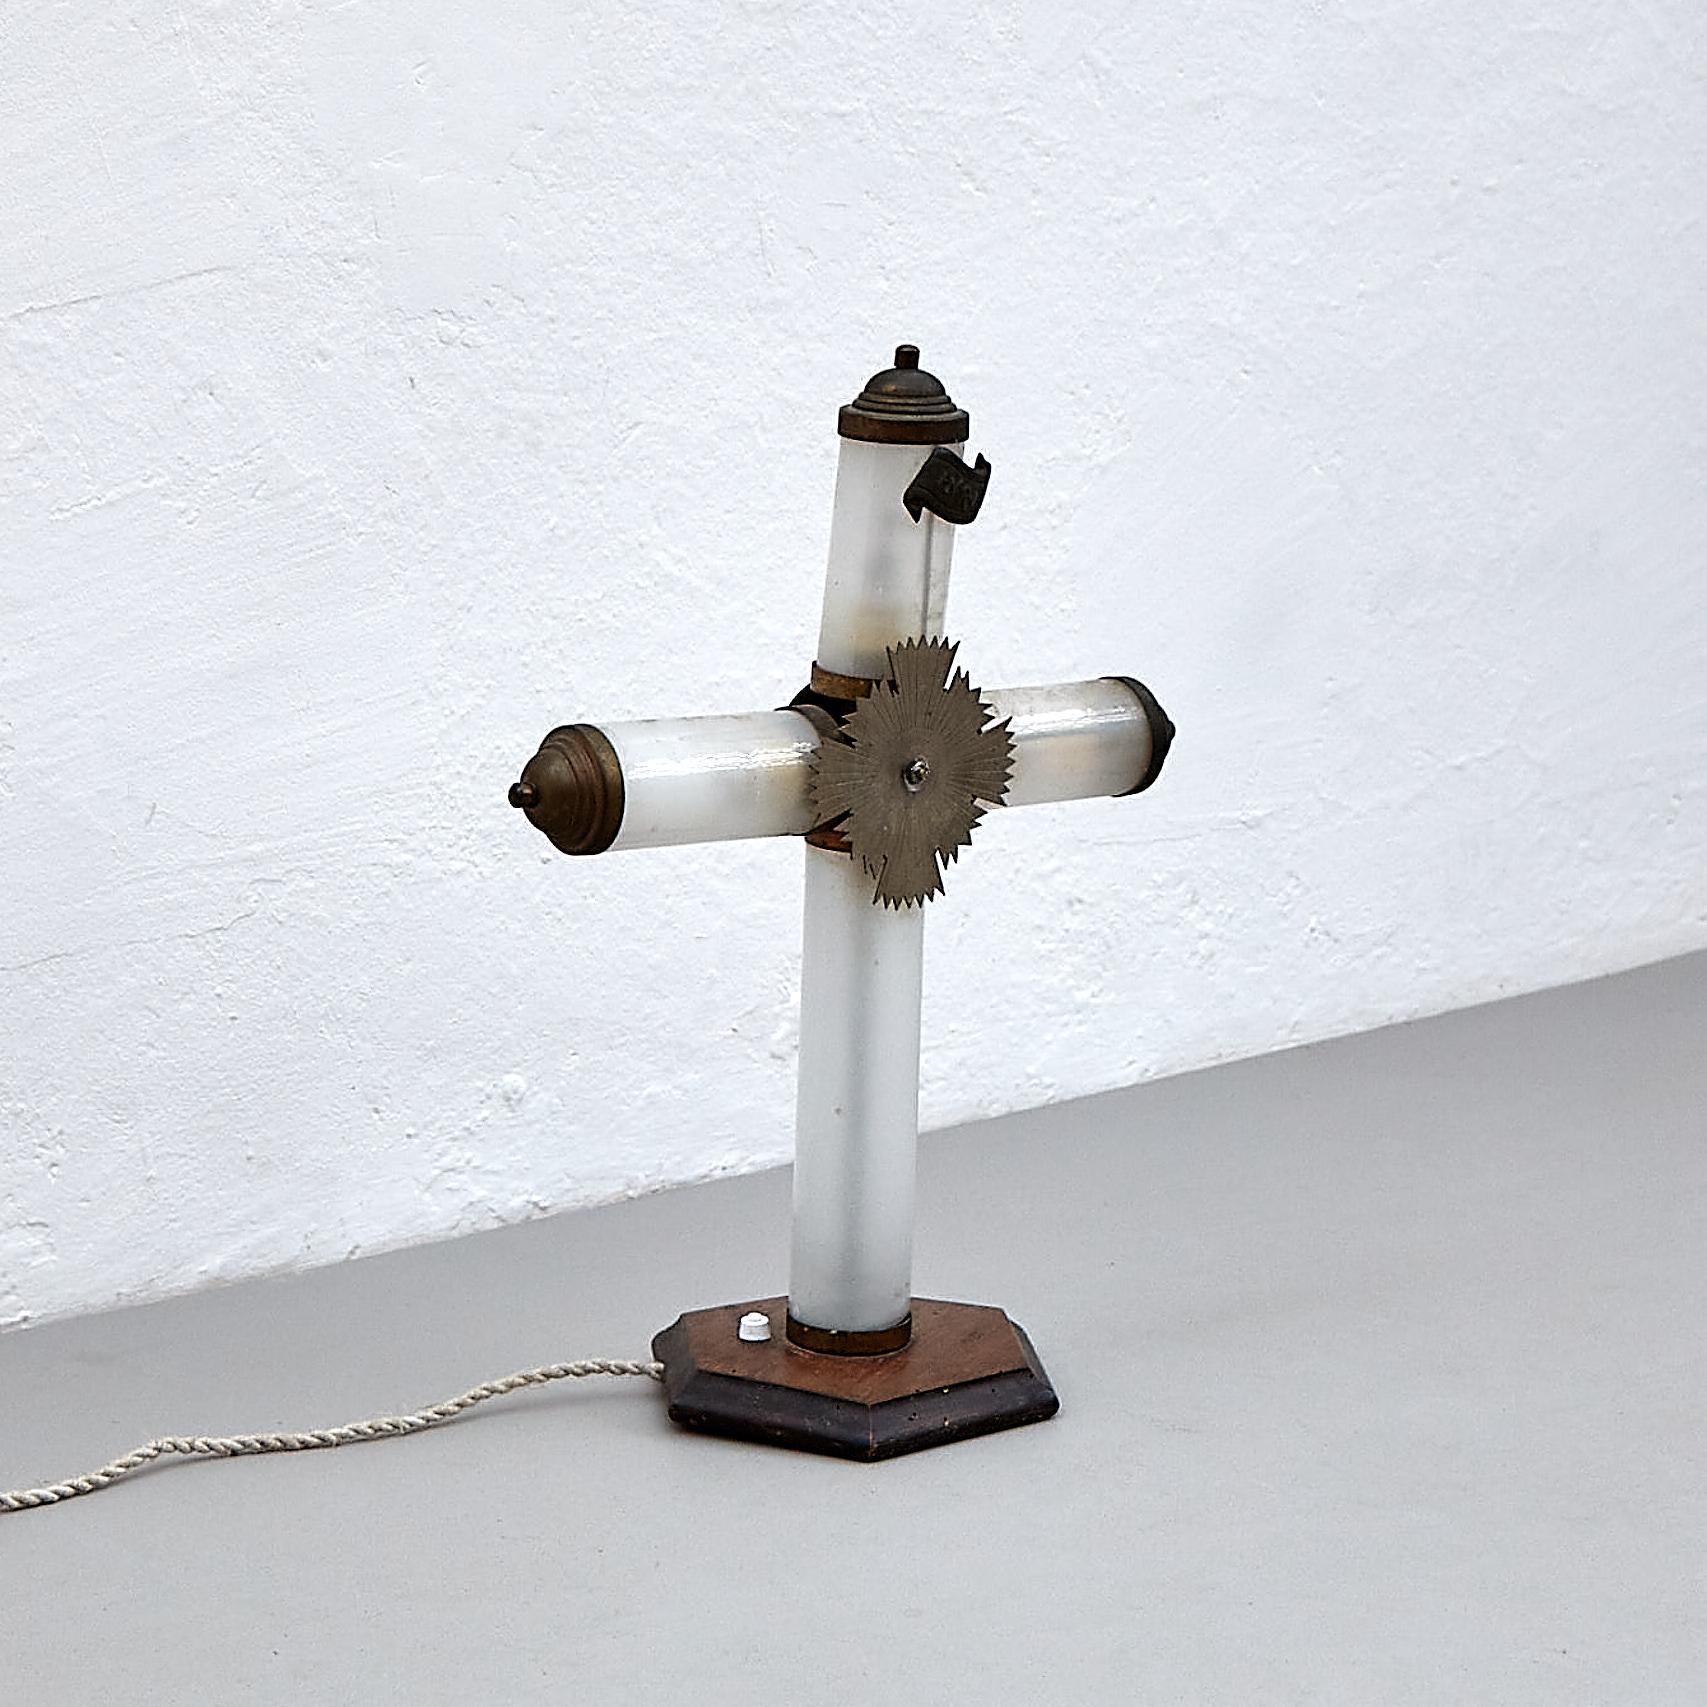 Early 20th century religious table lamp.

Manufactured in France, circa 1940.

In original condition with minor wear consistent of age and use, preserving a beautiful patina.

Materials: 
Metal, glass

Dimensions: 
D 17 cm x W 38 cm x H 49